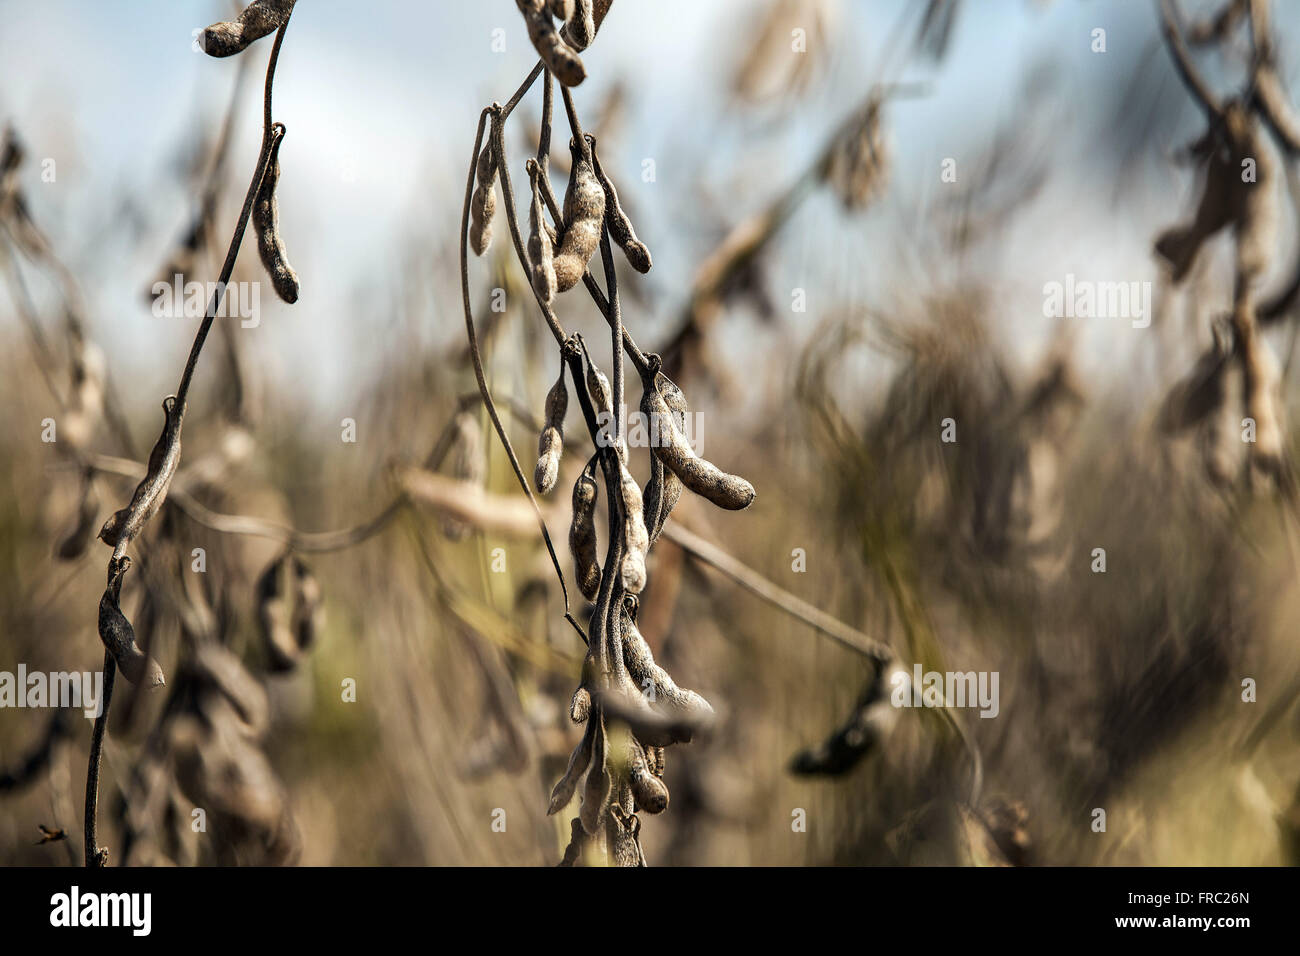 Detail of transgenic soy beans ready for harvest in the countryside Stock Photo